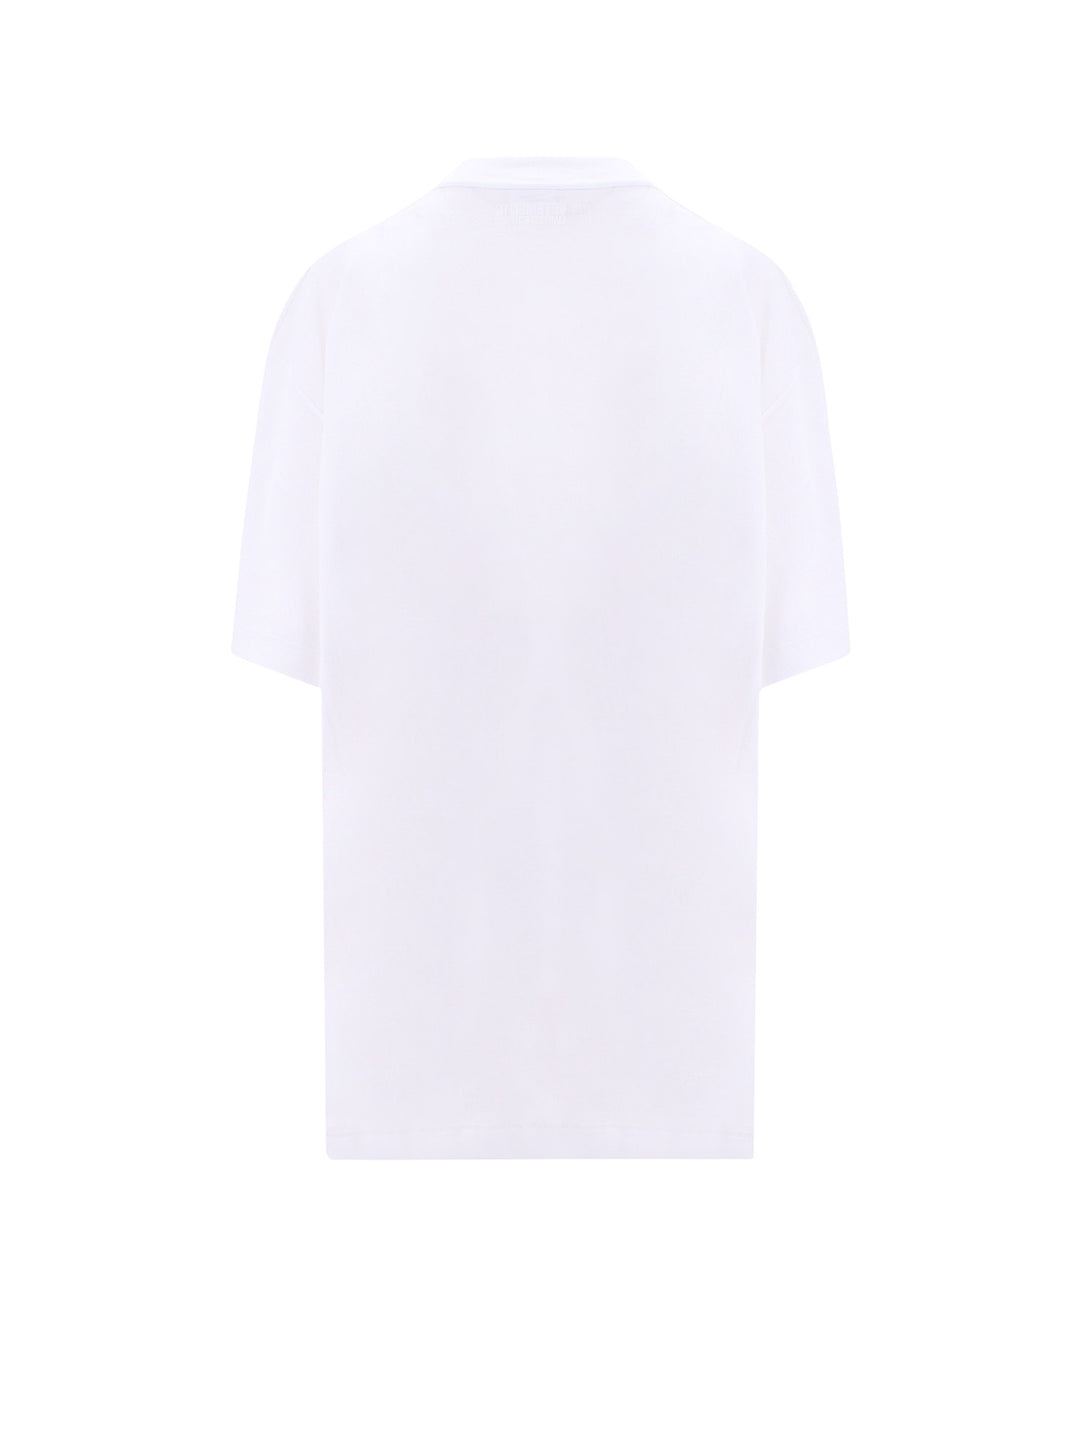 T-shirt All-White Inside-Out